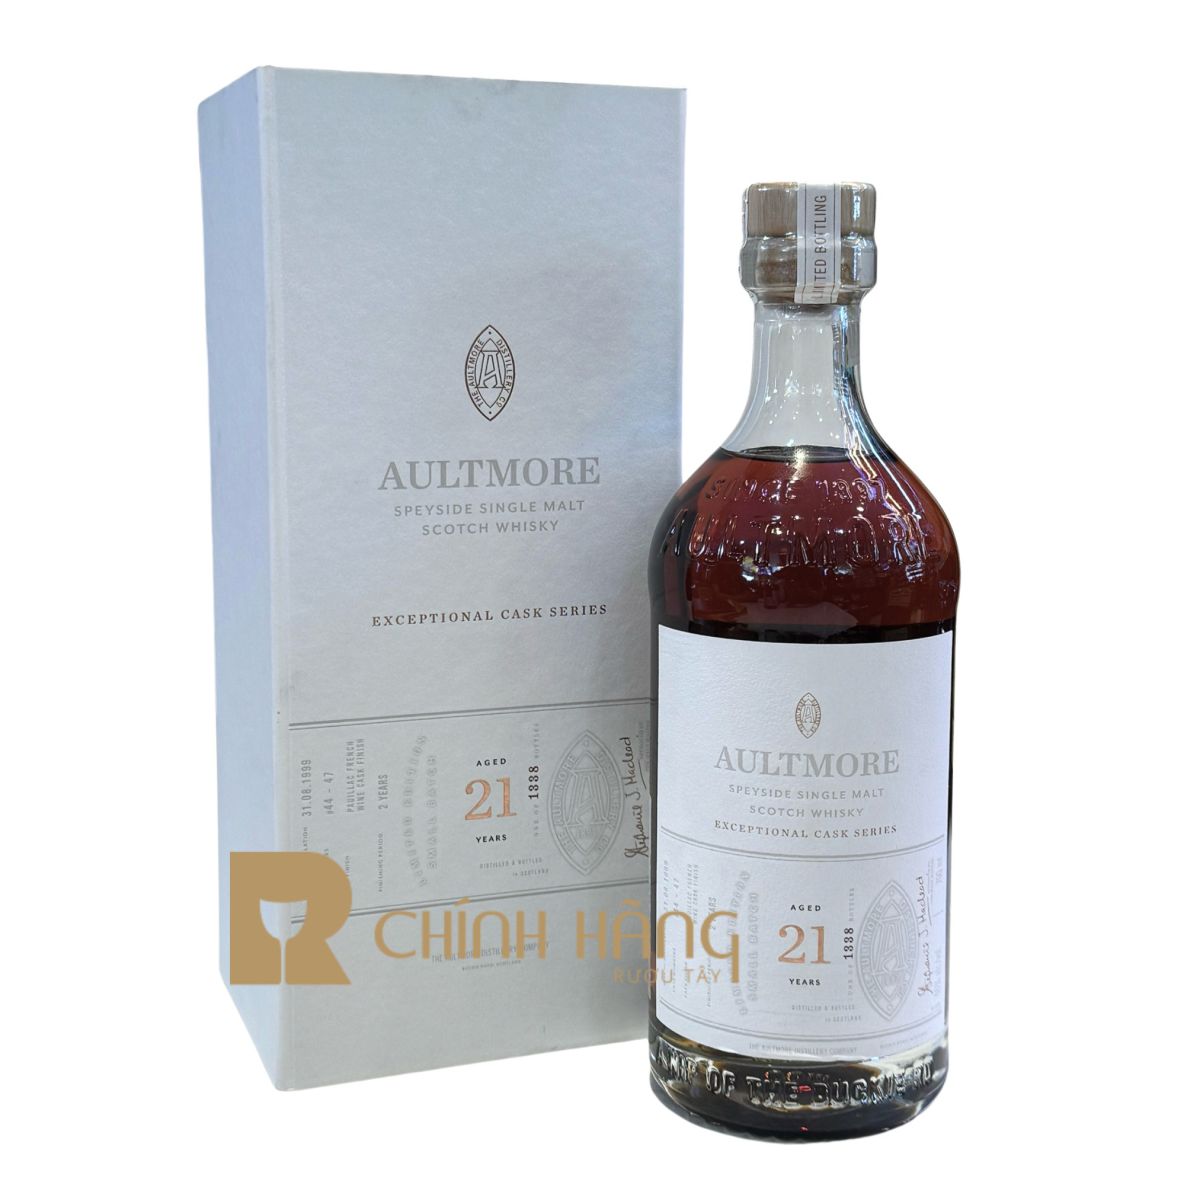 Aultmore 21 Year Old Exceptional Cask – Pauillac French Wine Cask